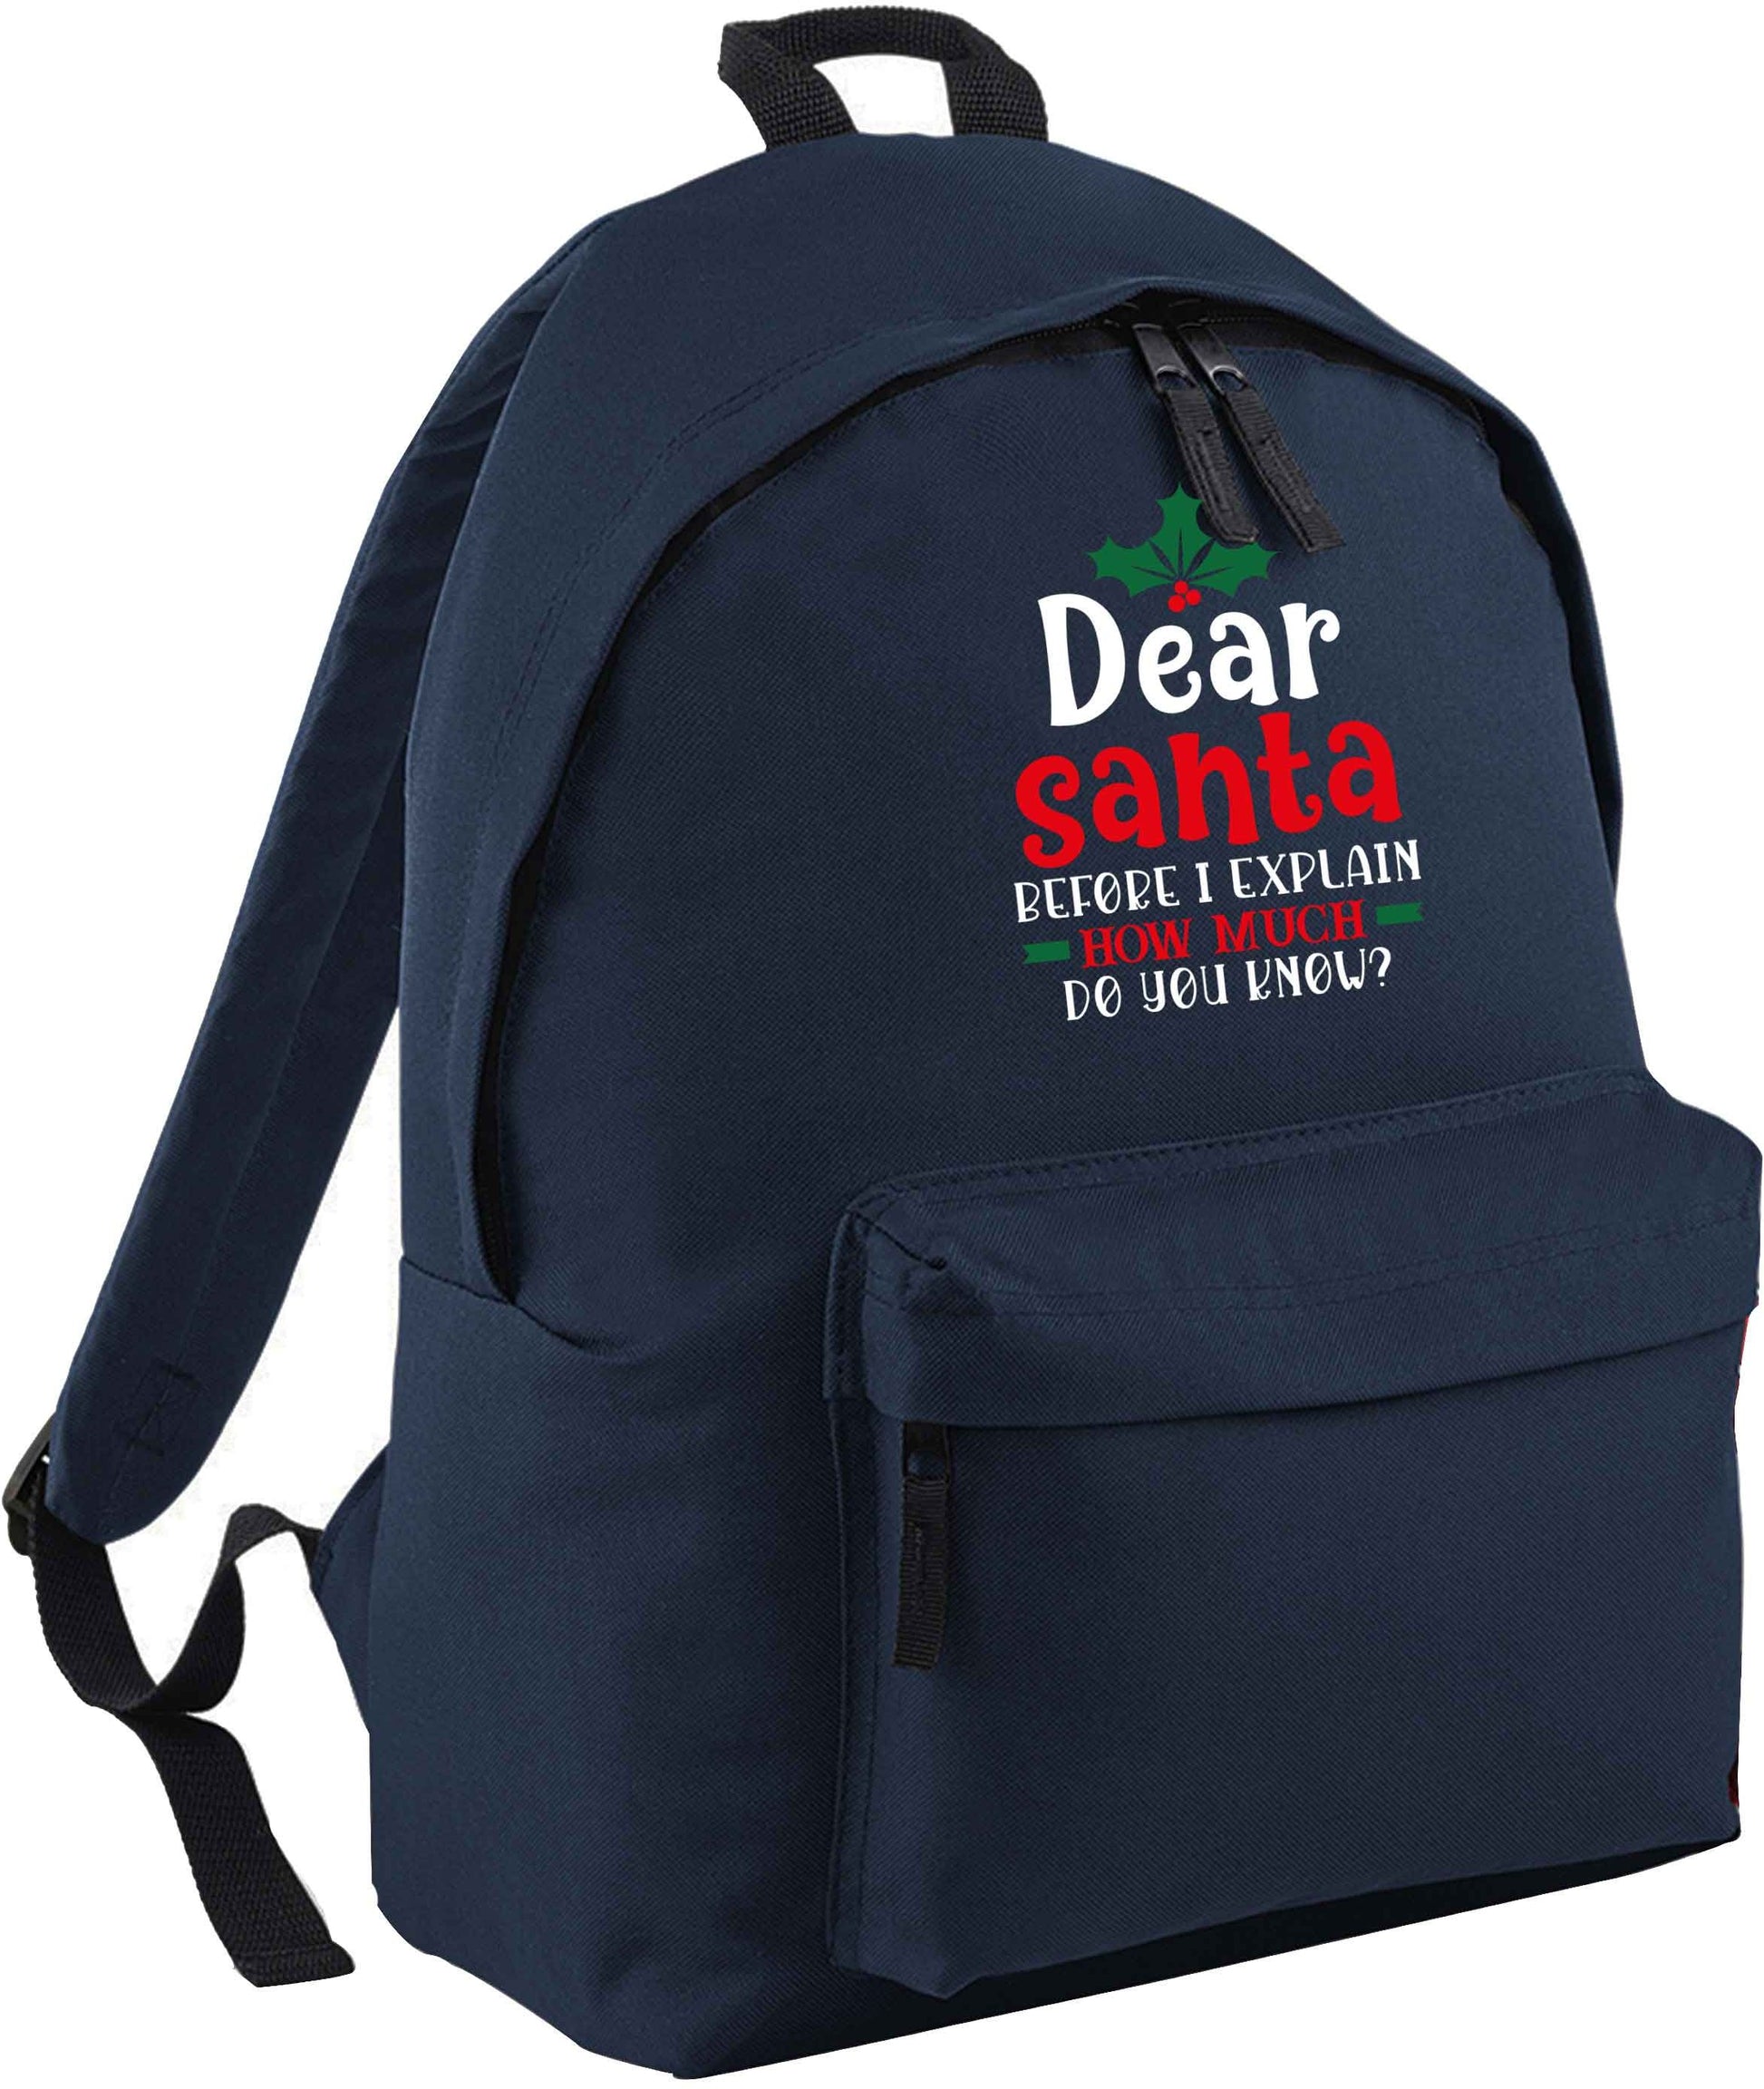 Santa before I explain how much do you know? navy adults backpack